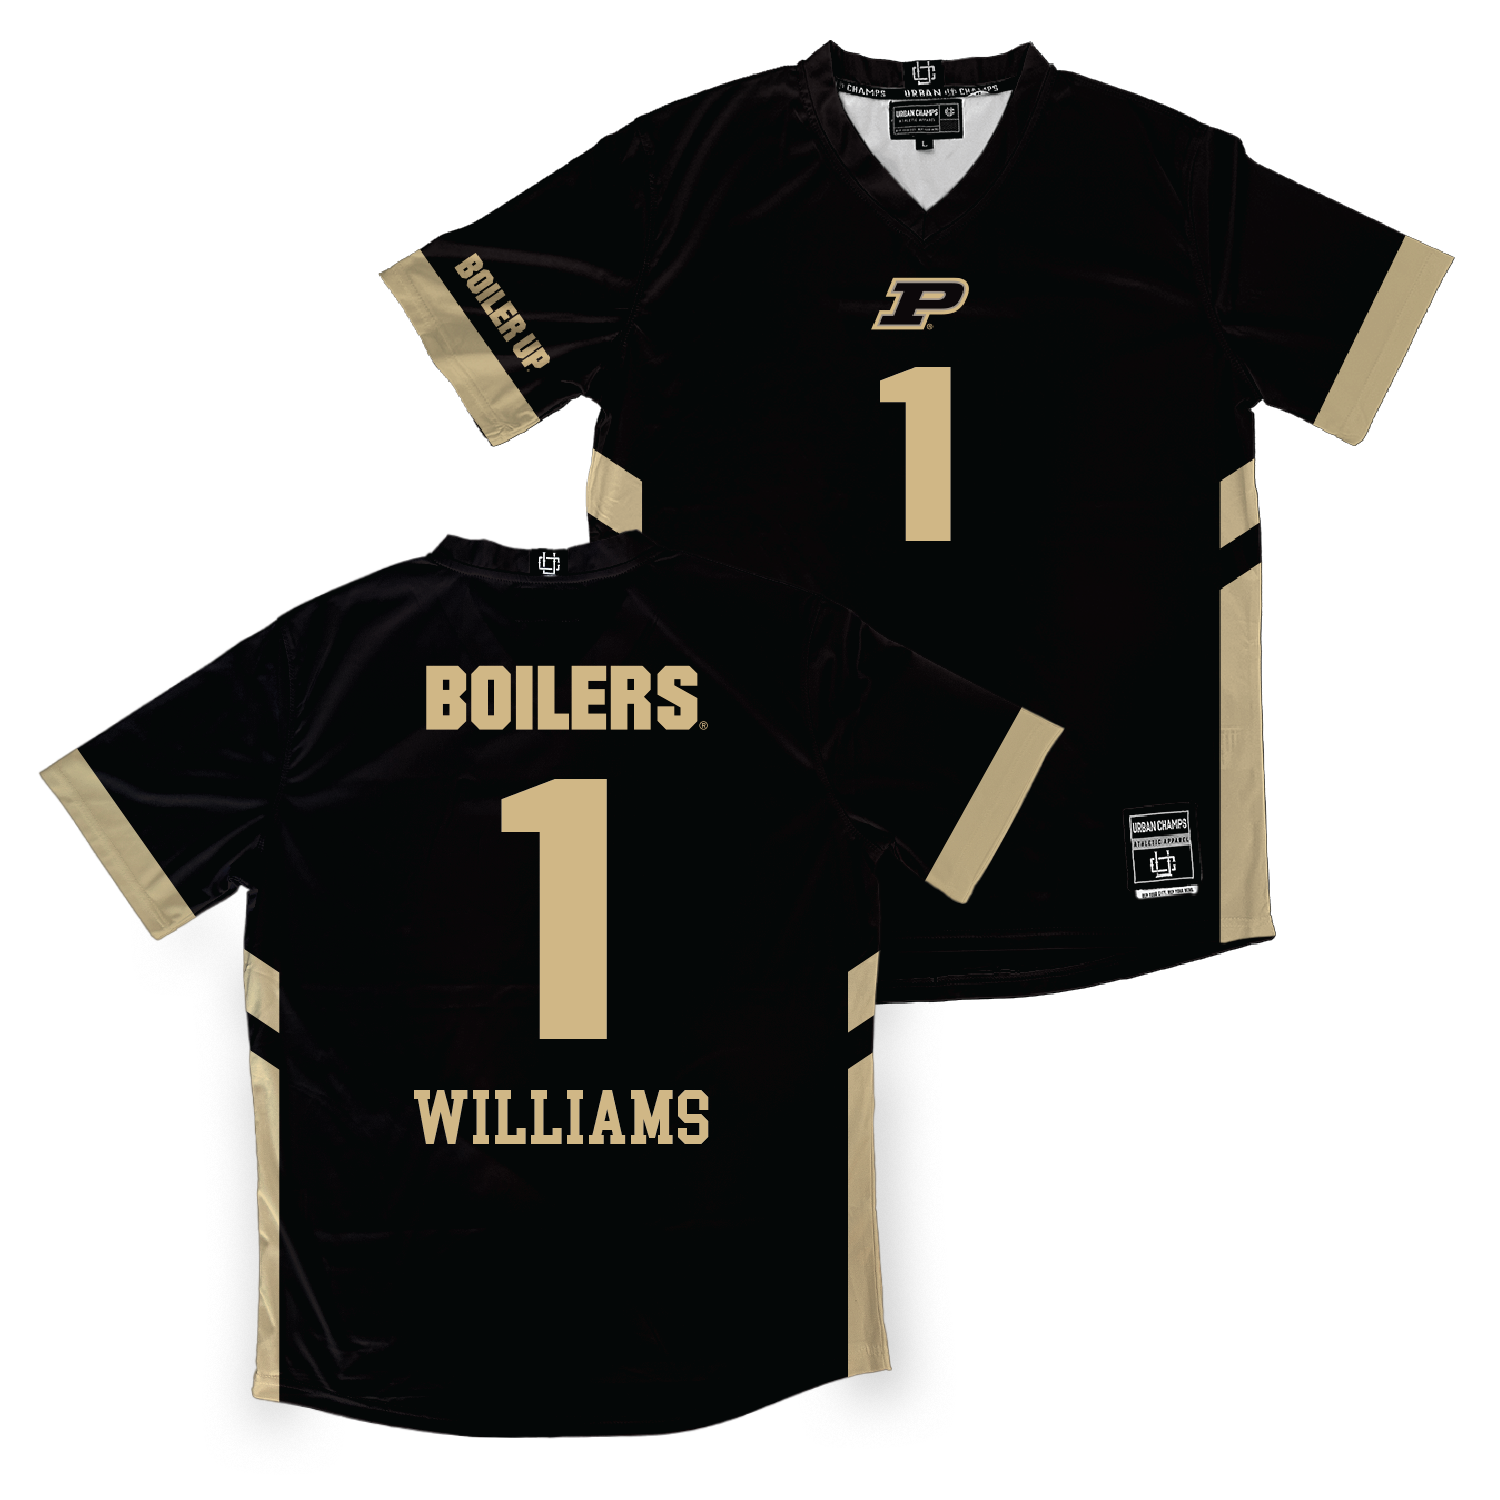 Black Purdue Women's Volleyball Jersey - Rachel Williams | #1 Youth Small